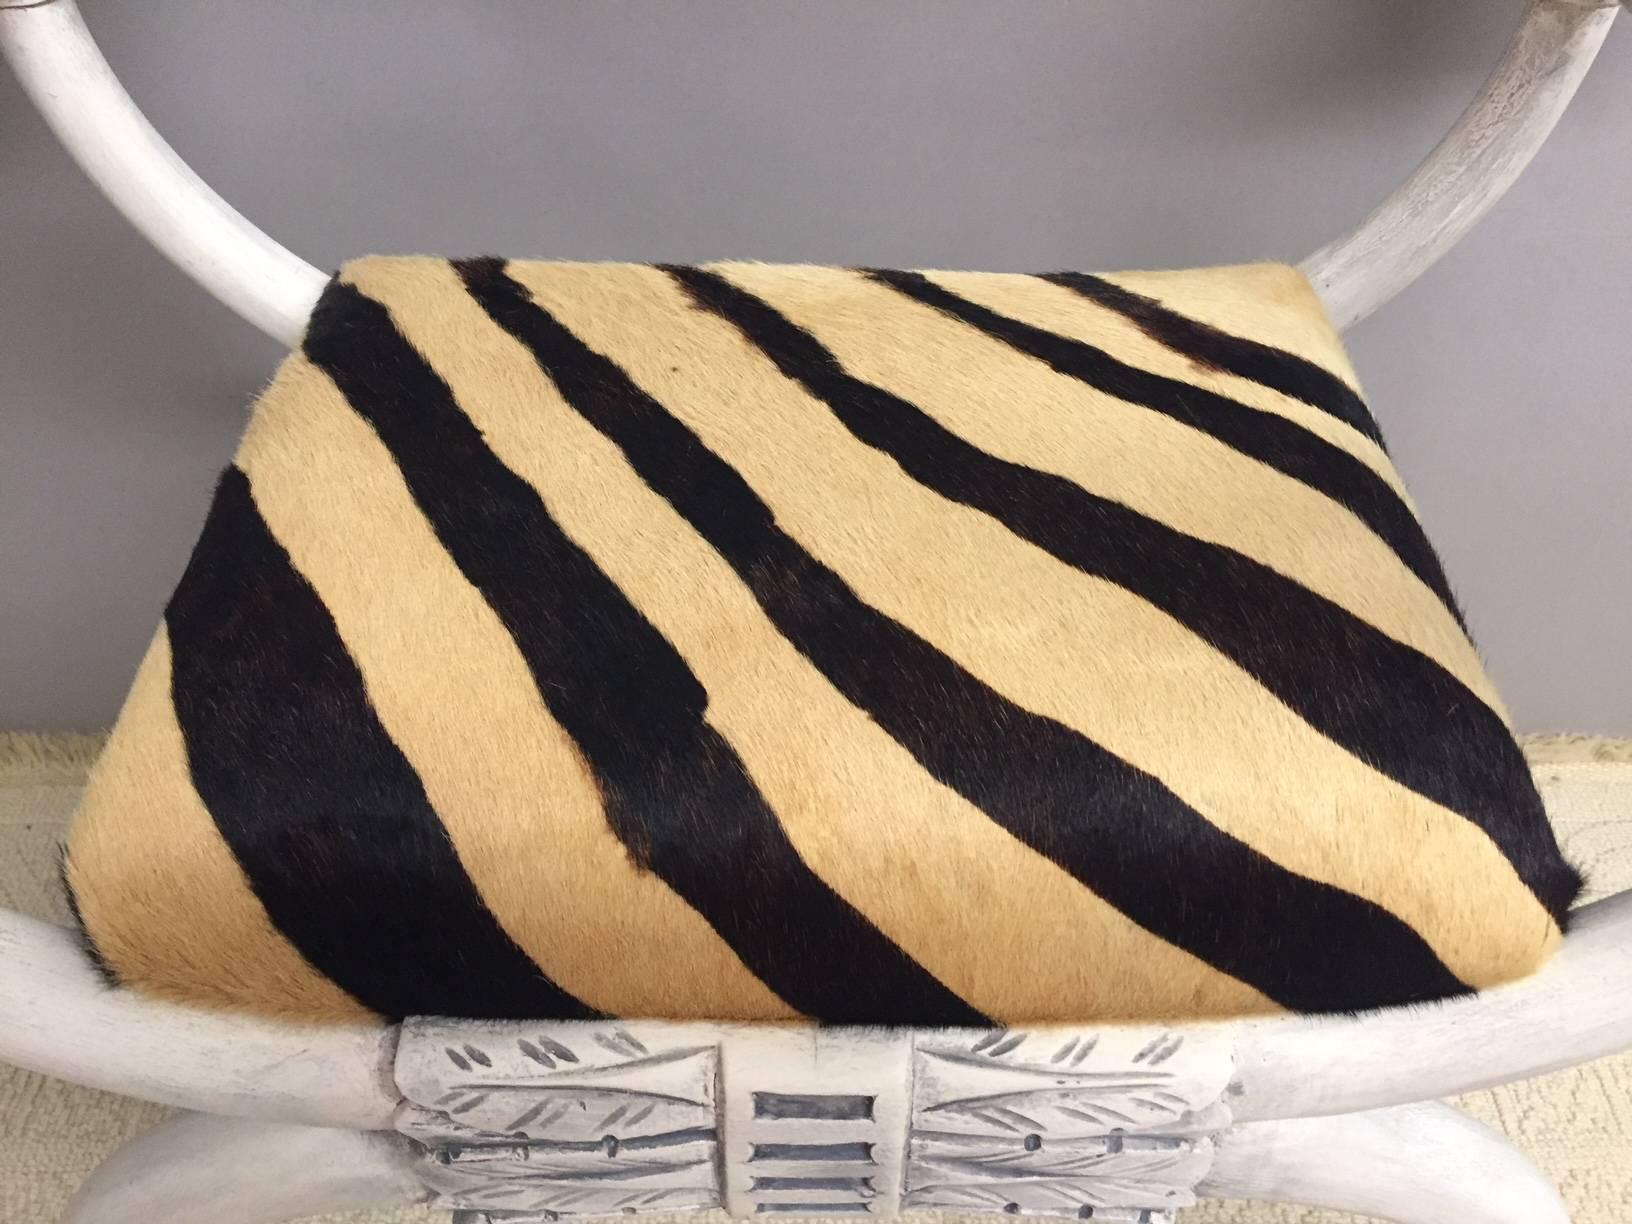 Dramatic Pair of Ram's Head Benches with Printed Cowhide Zebra Motife Seats 2